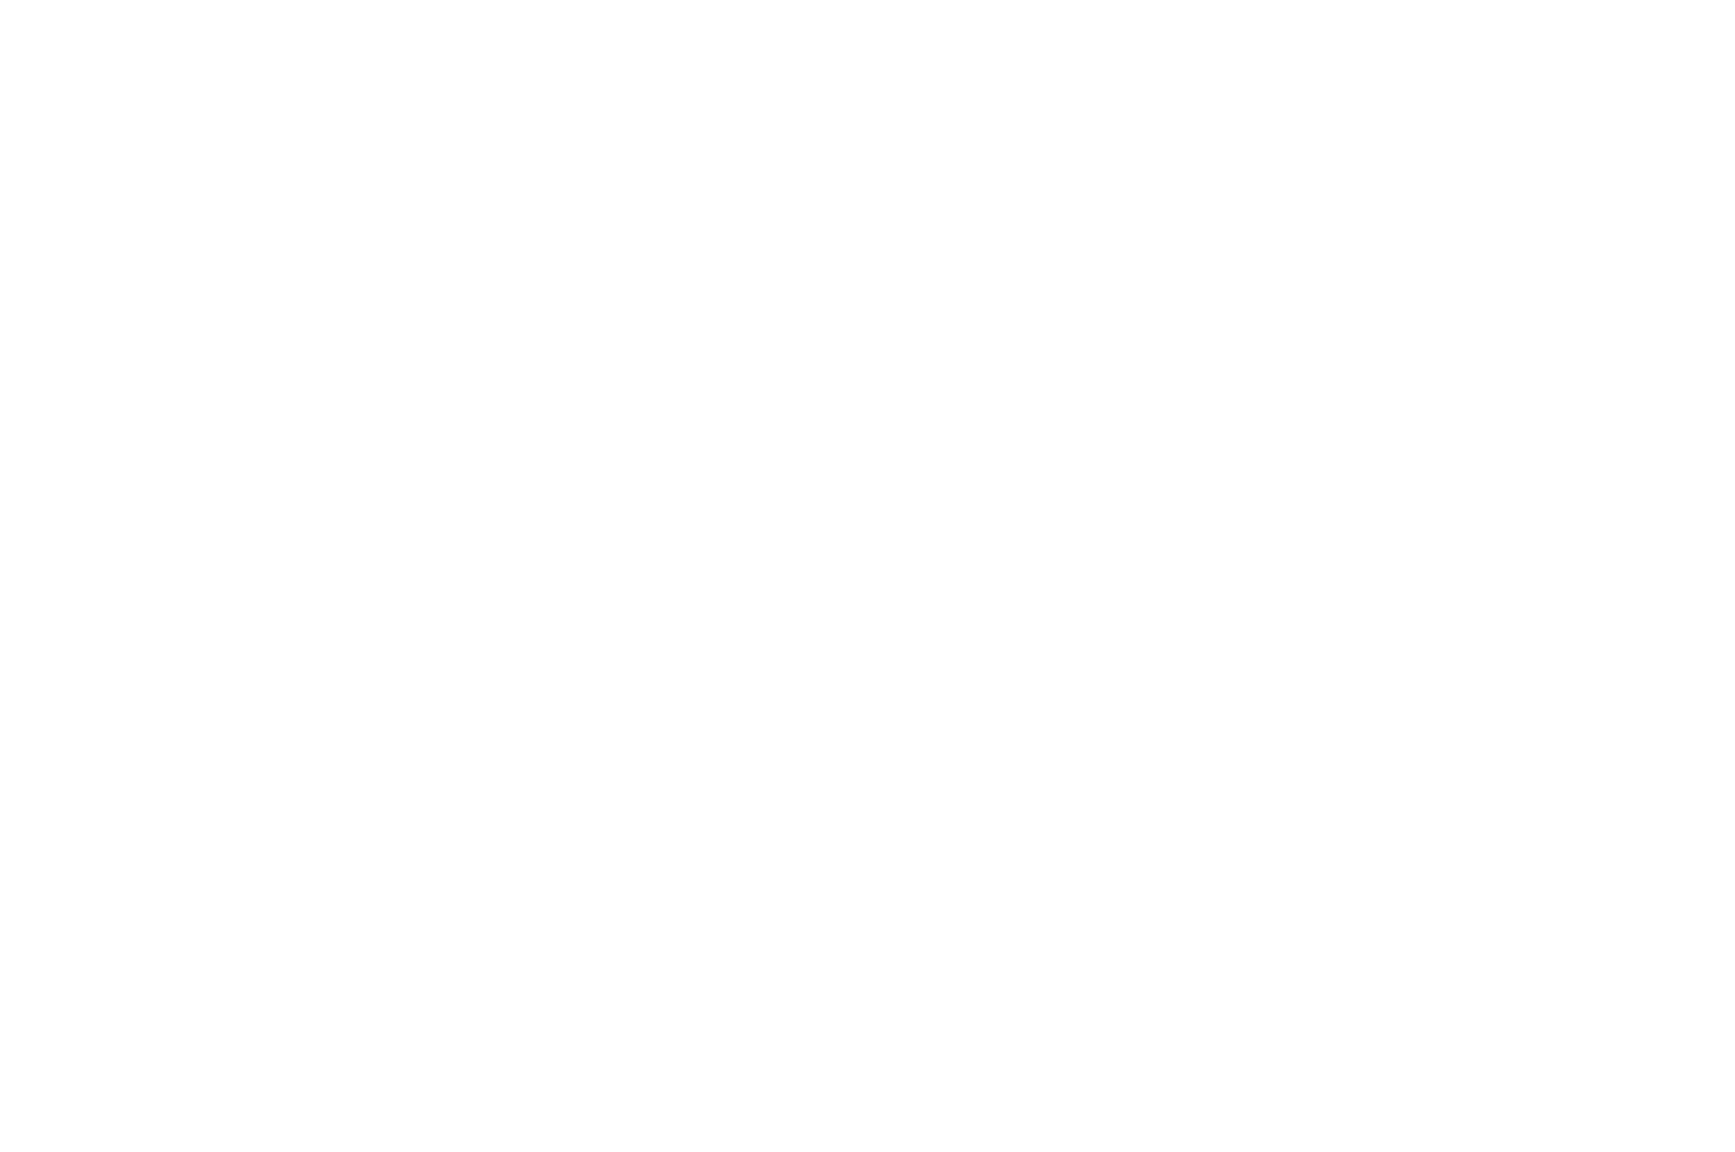 OFFICIAL SELECTION - Seattle Erotic Festival - 2022